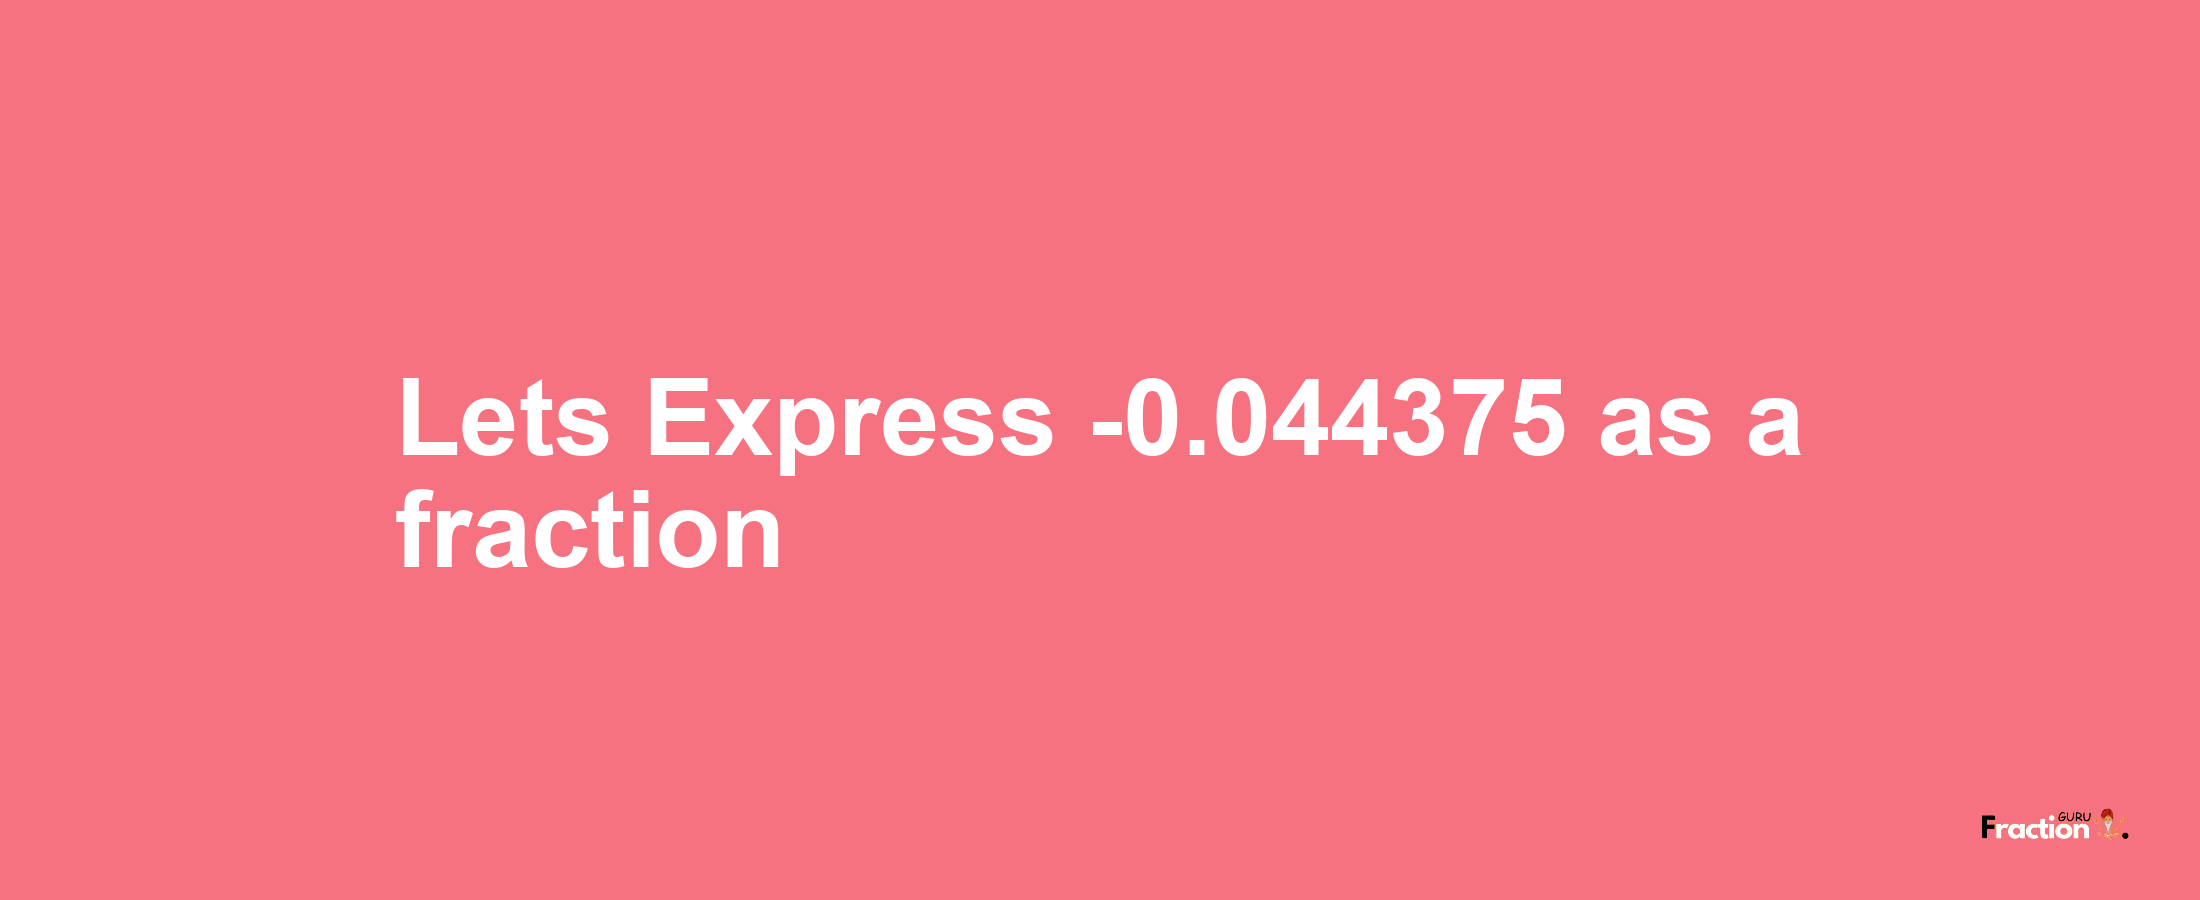 Lets Express -0.044375 as afraction